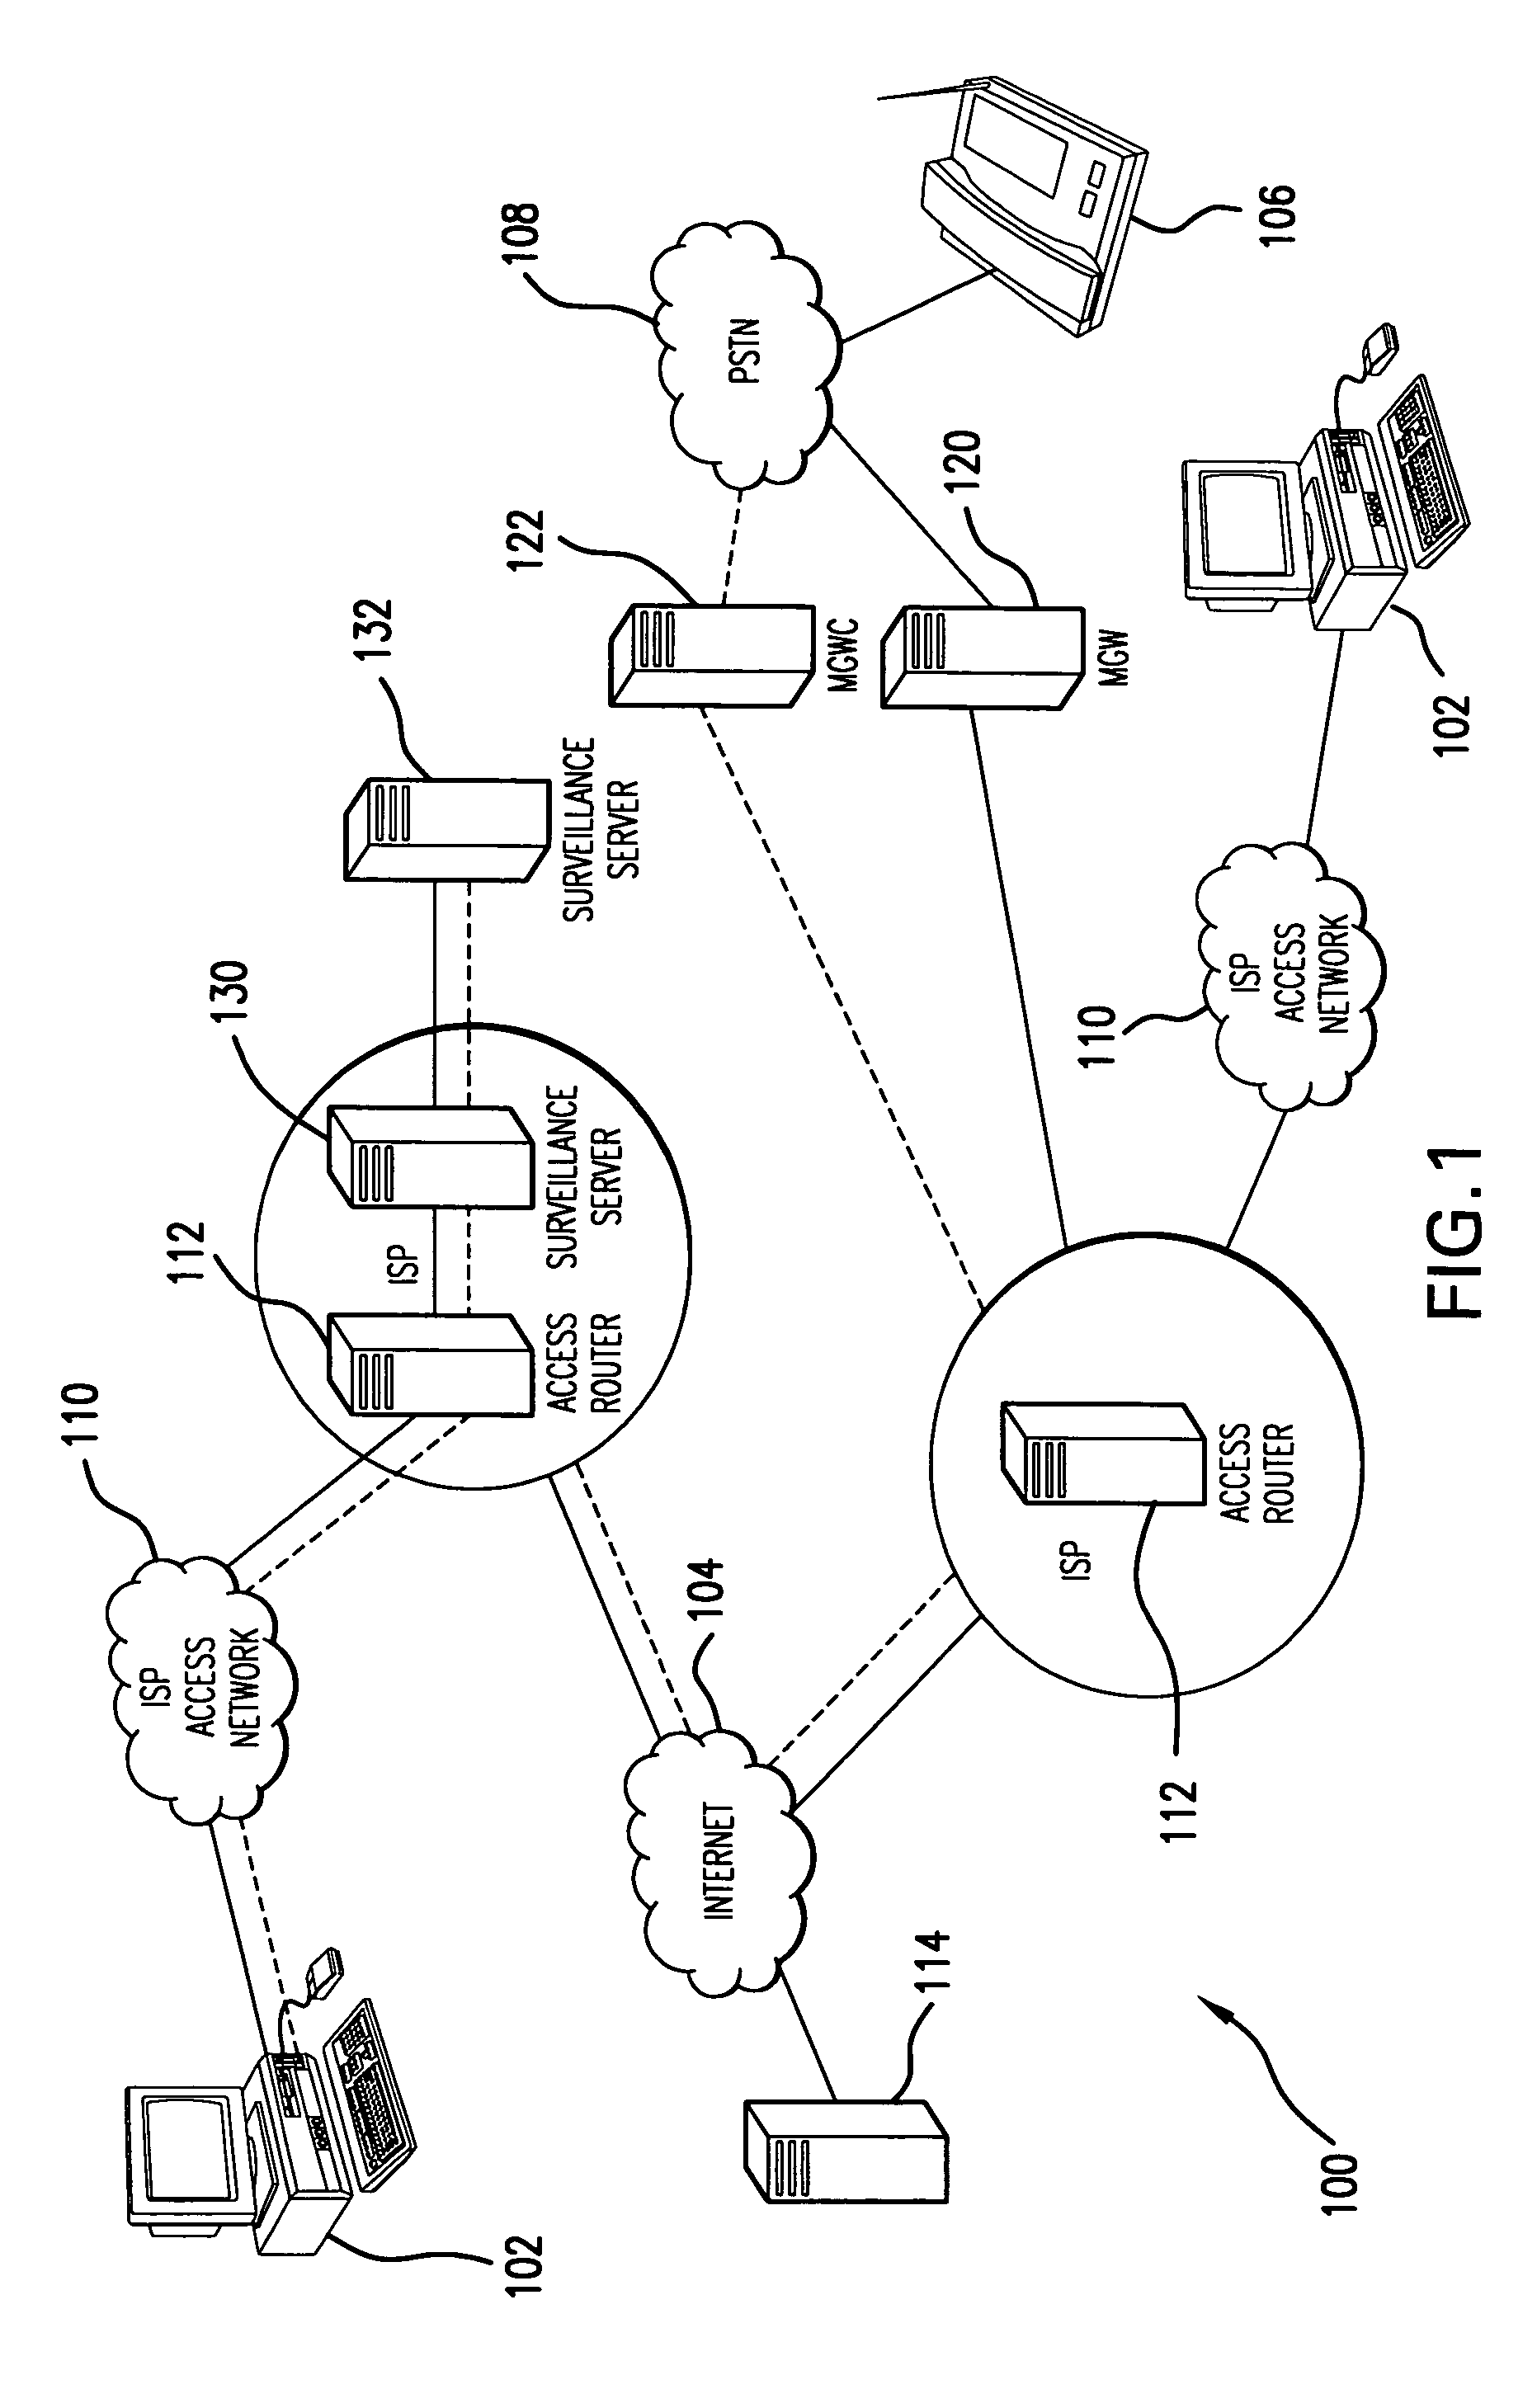 Method and apparatus for surveillance of voice over internet protocol communications